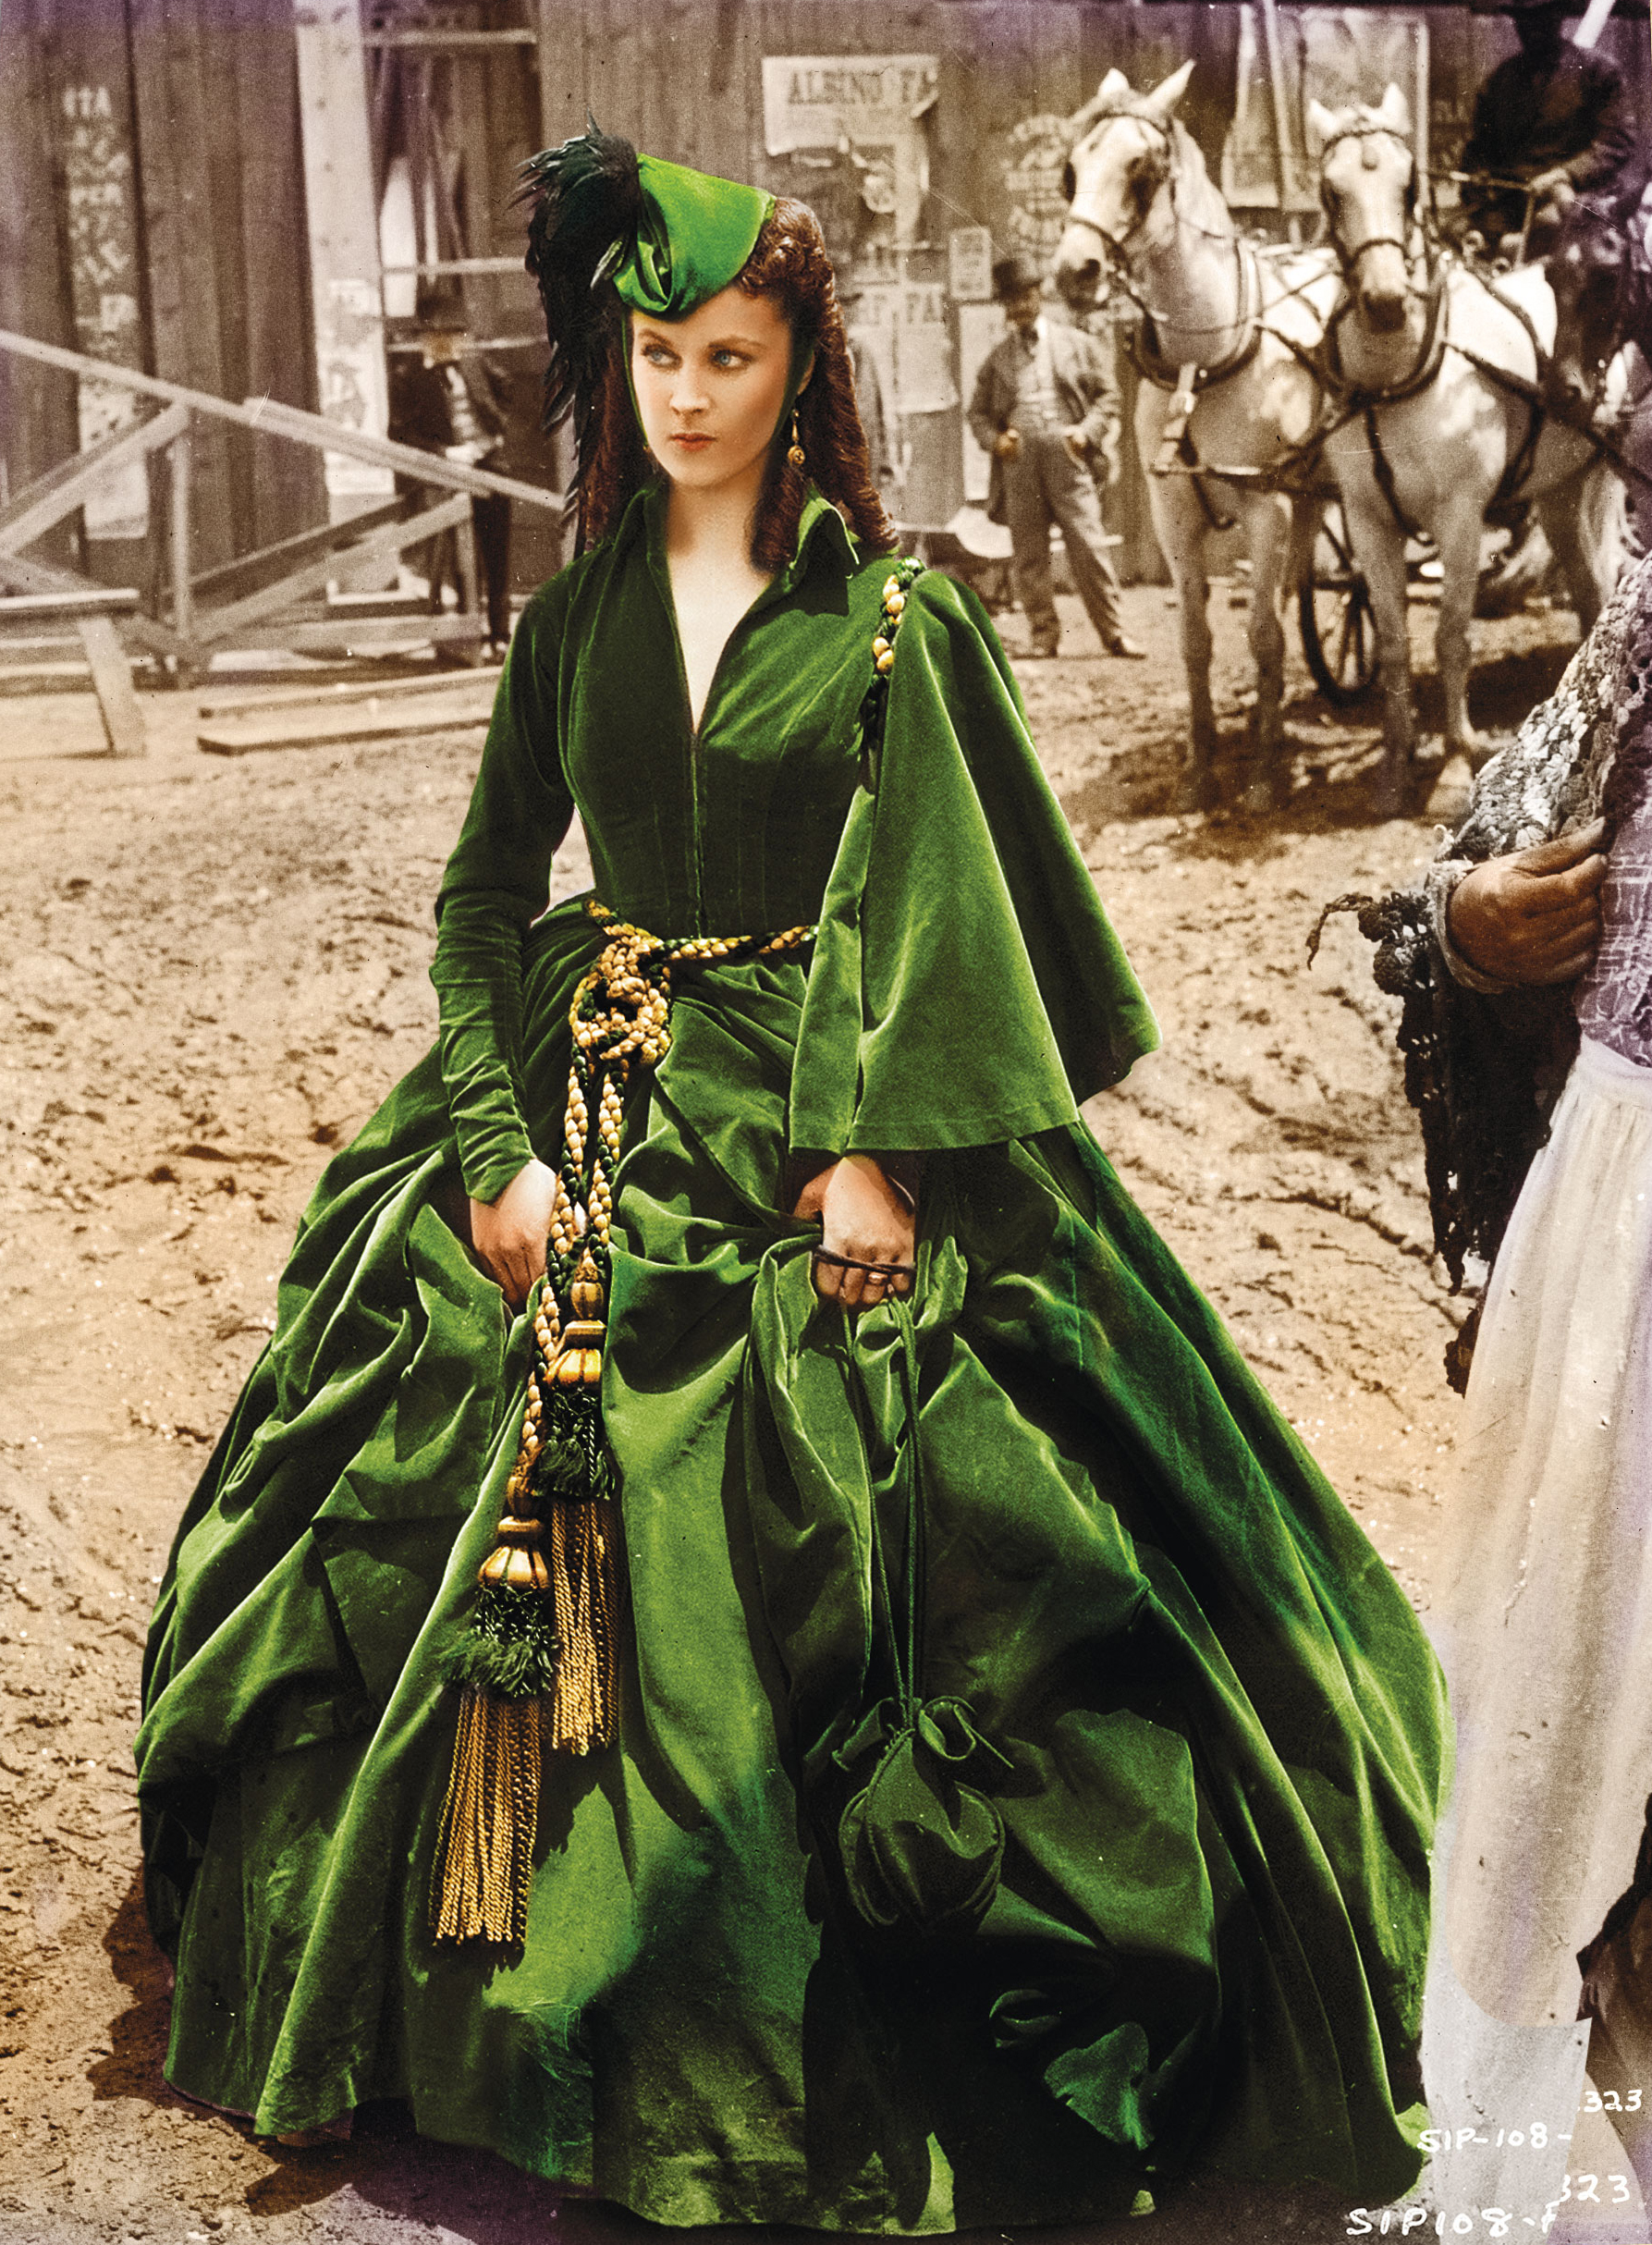 Vivien-Leigh-Gone-With-the-Wind-1939